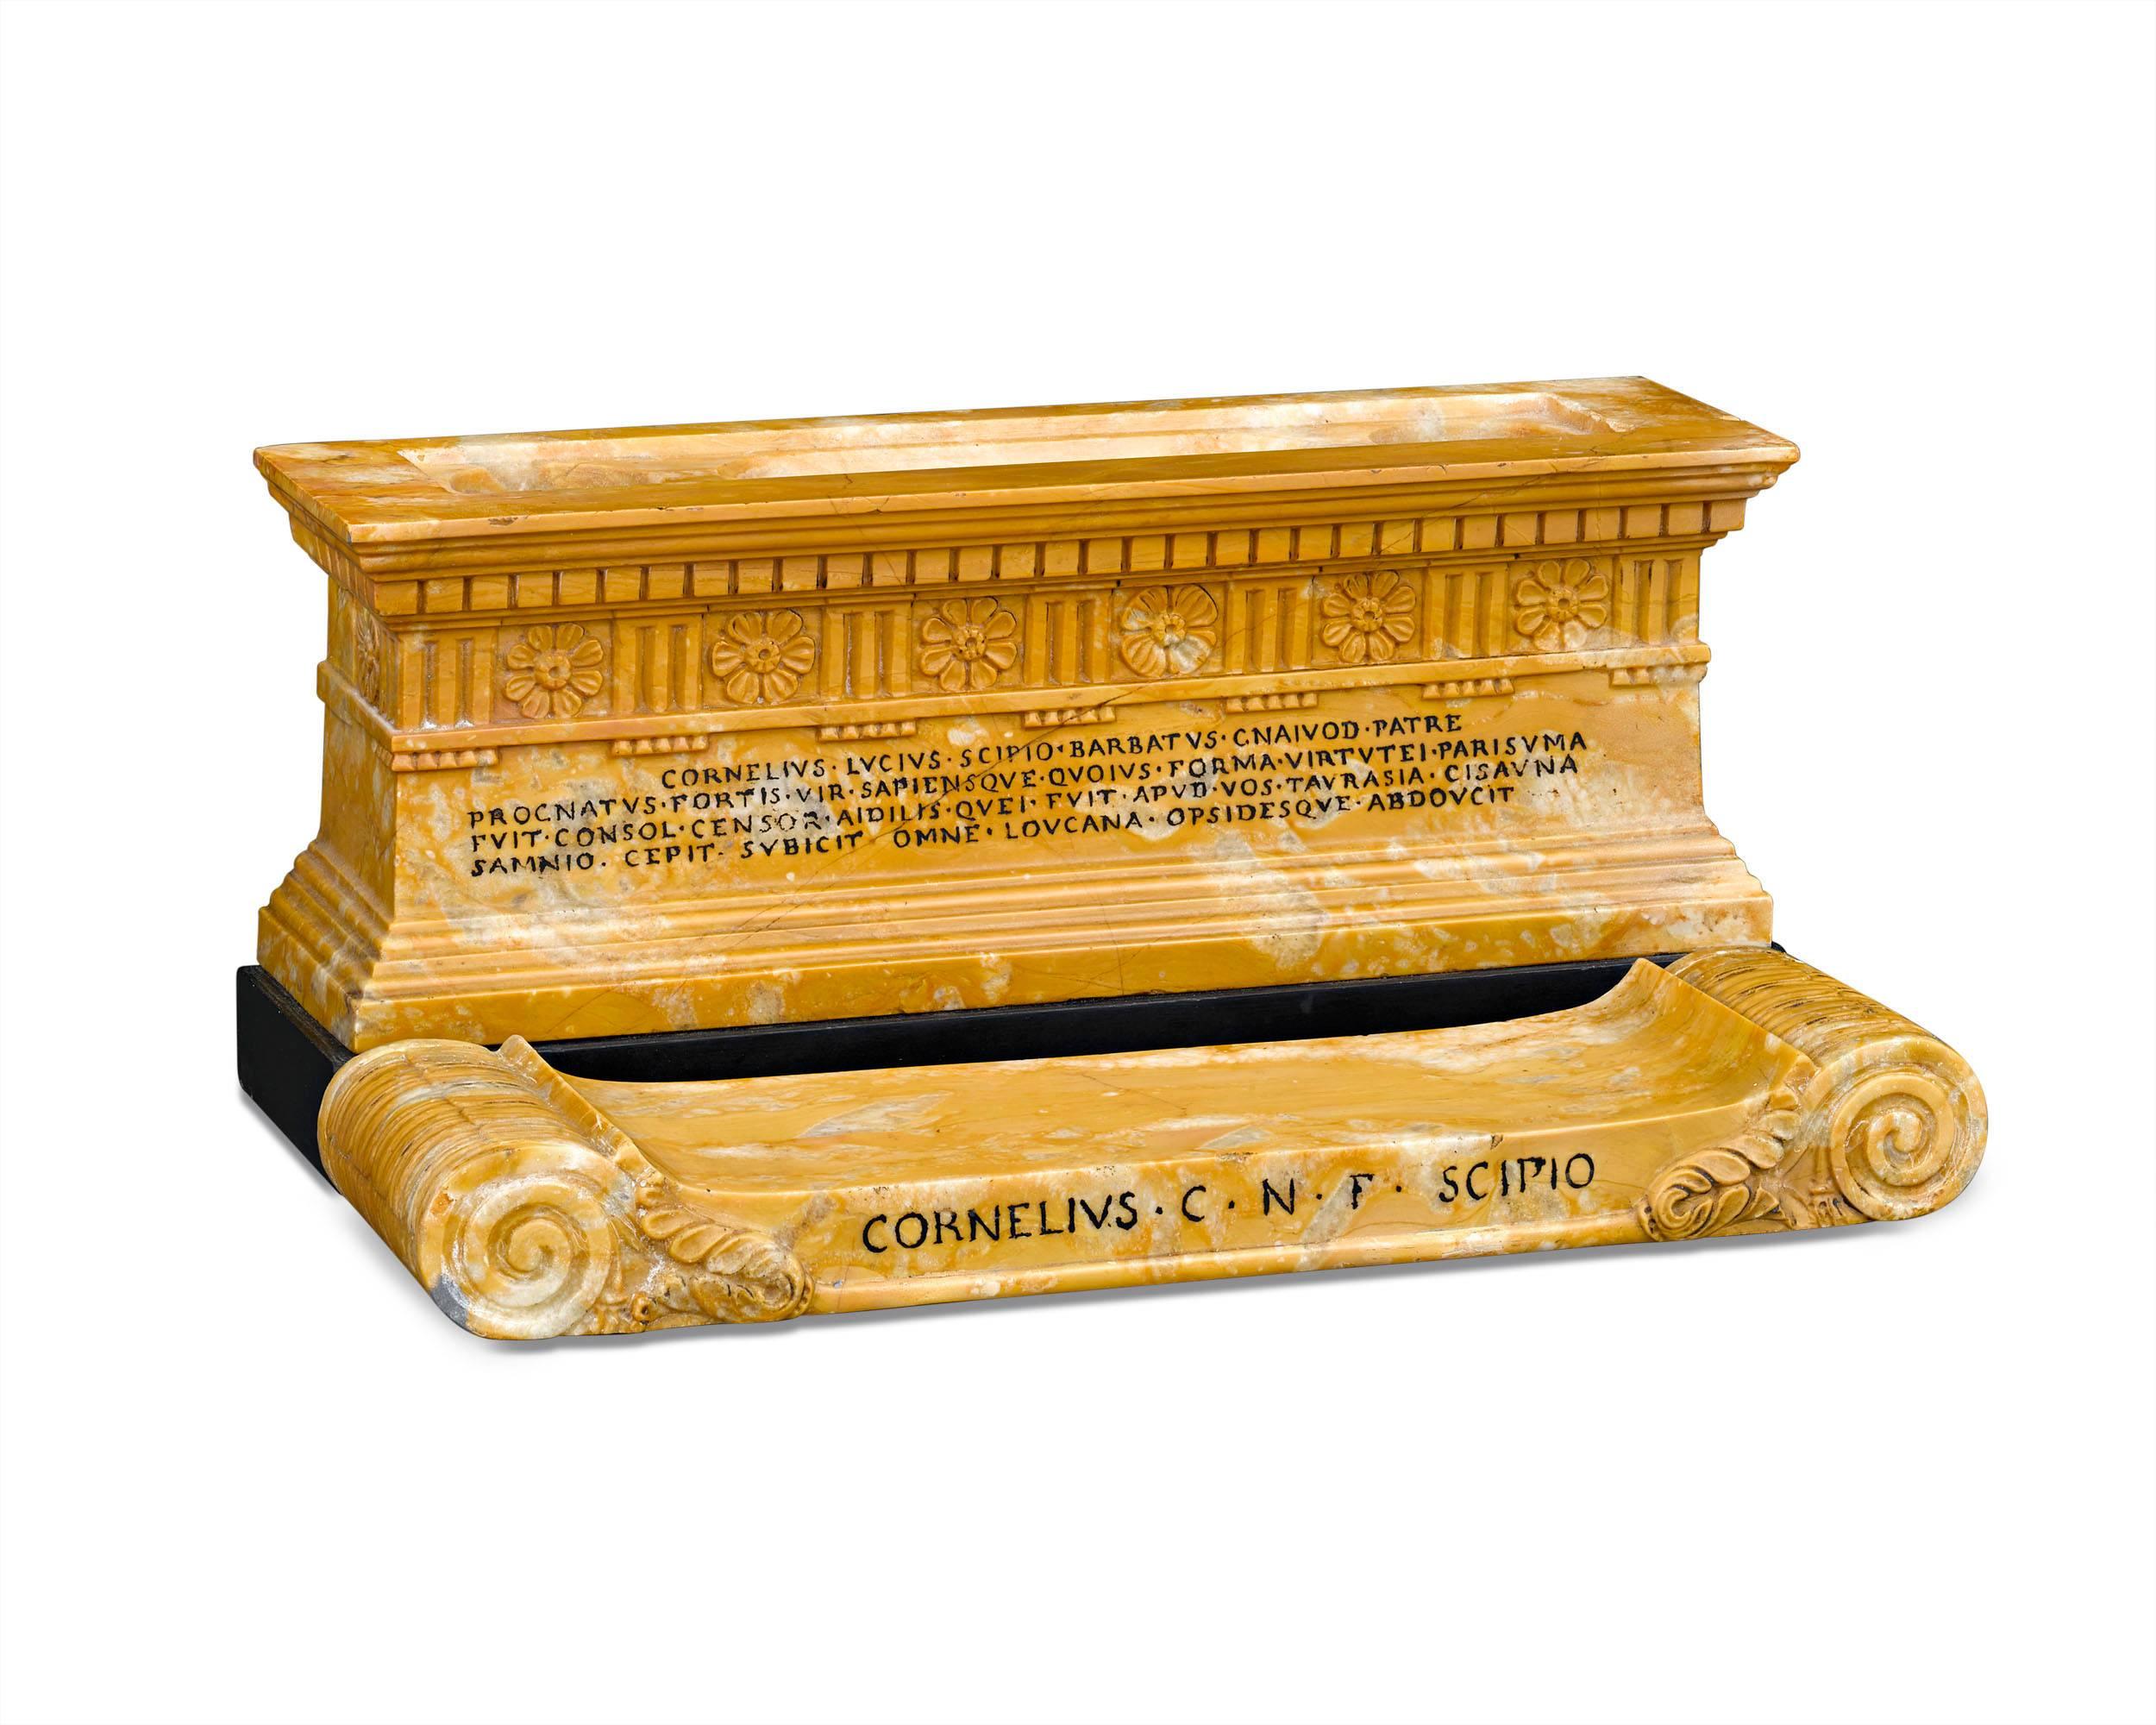 This incredible Grand Tour inkwell relic takes the form of the ancient Tomb of the Scipios, a family of Roman war heroes and generals. Beautifully carved entirely of Siena marble, the inkwell's design is masterful and precise to the original